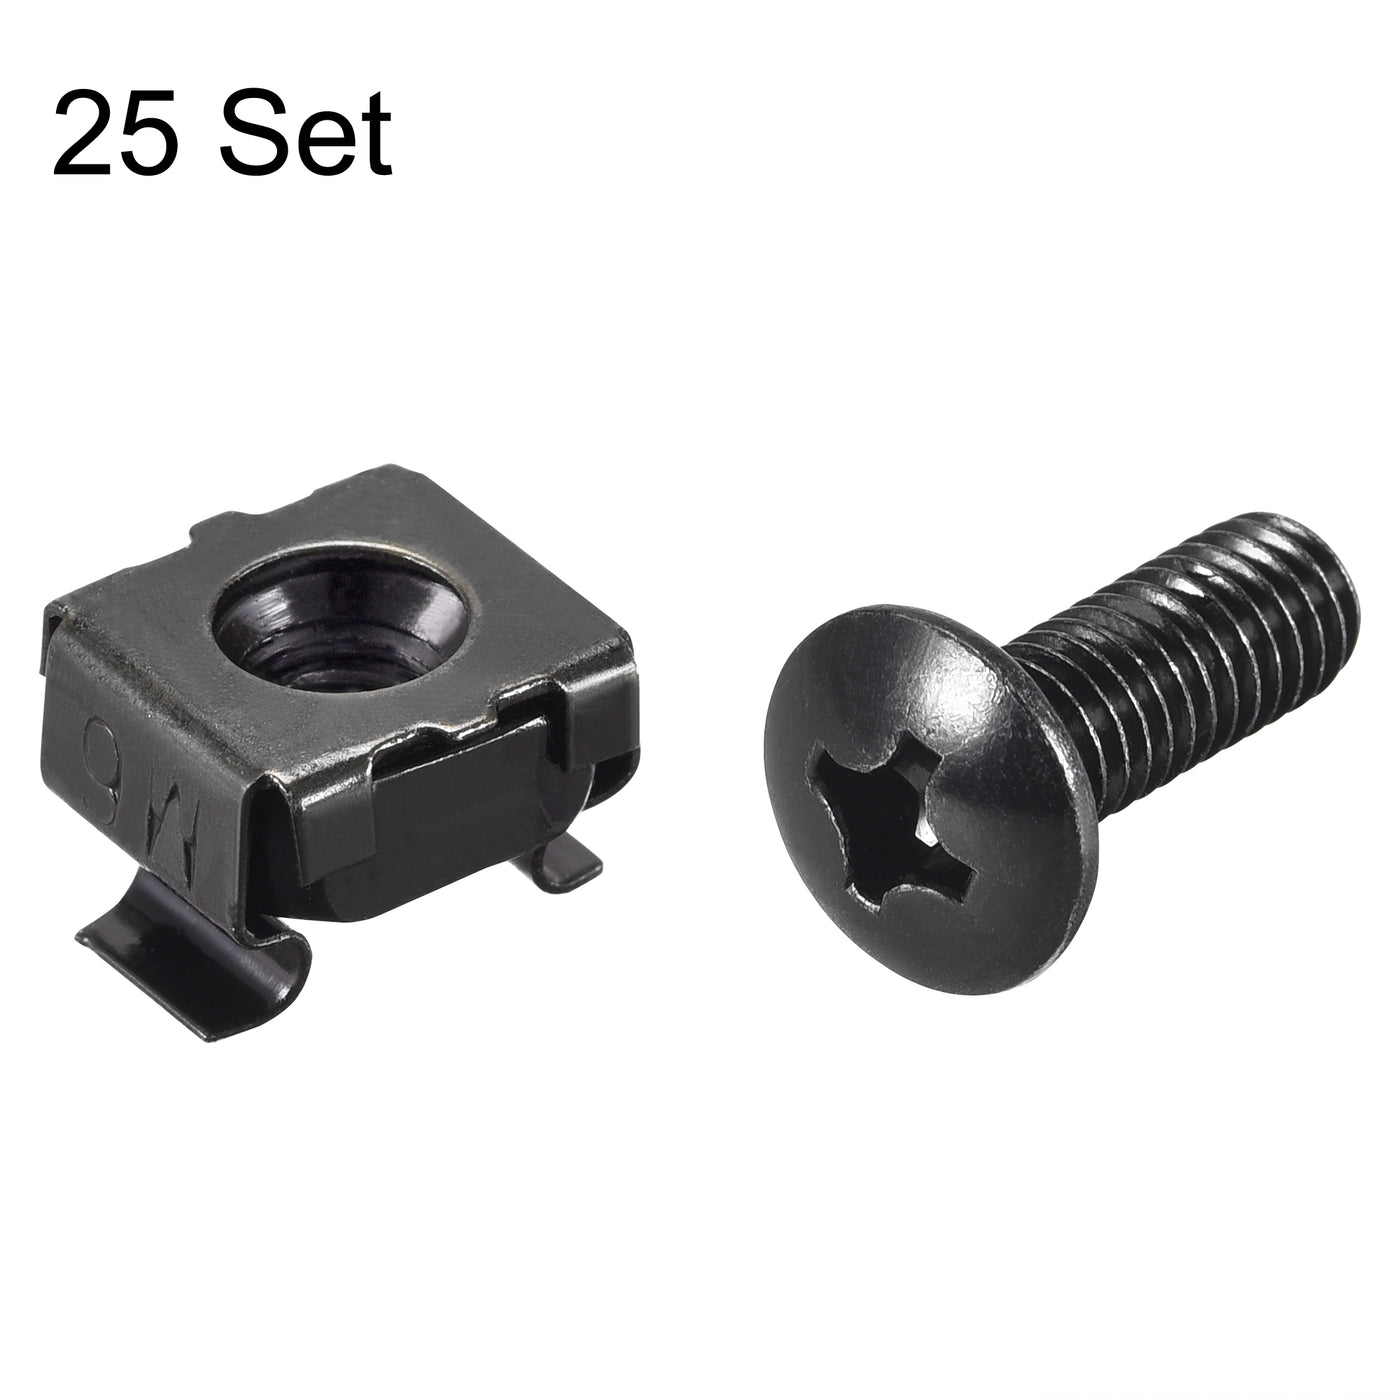 uxcell Uxcell M6 x 19mm Cage Nuts and Screws Carbon Steel for Rack Mount Server Shelve Cabinet Set of 25